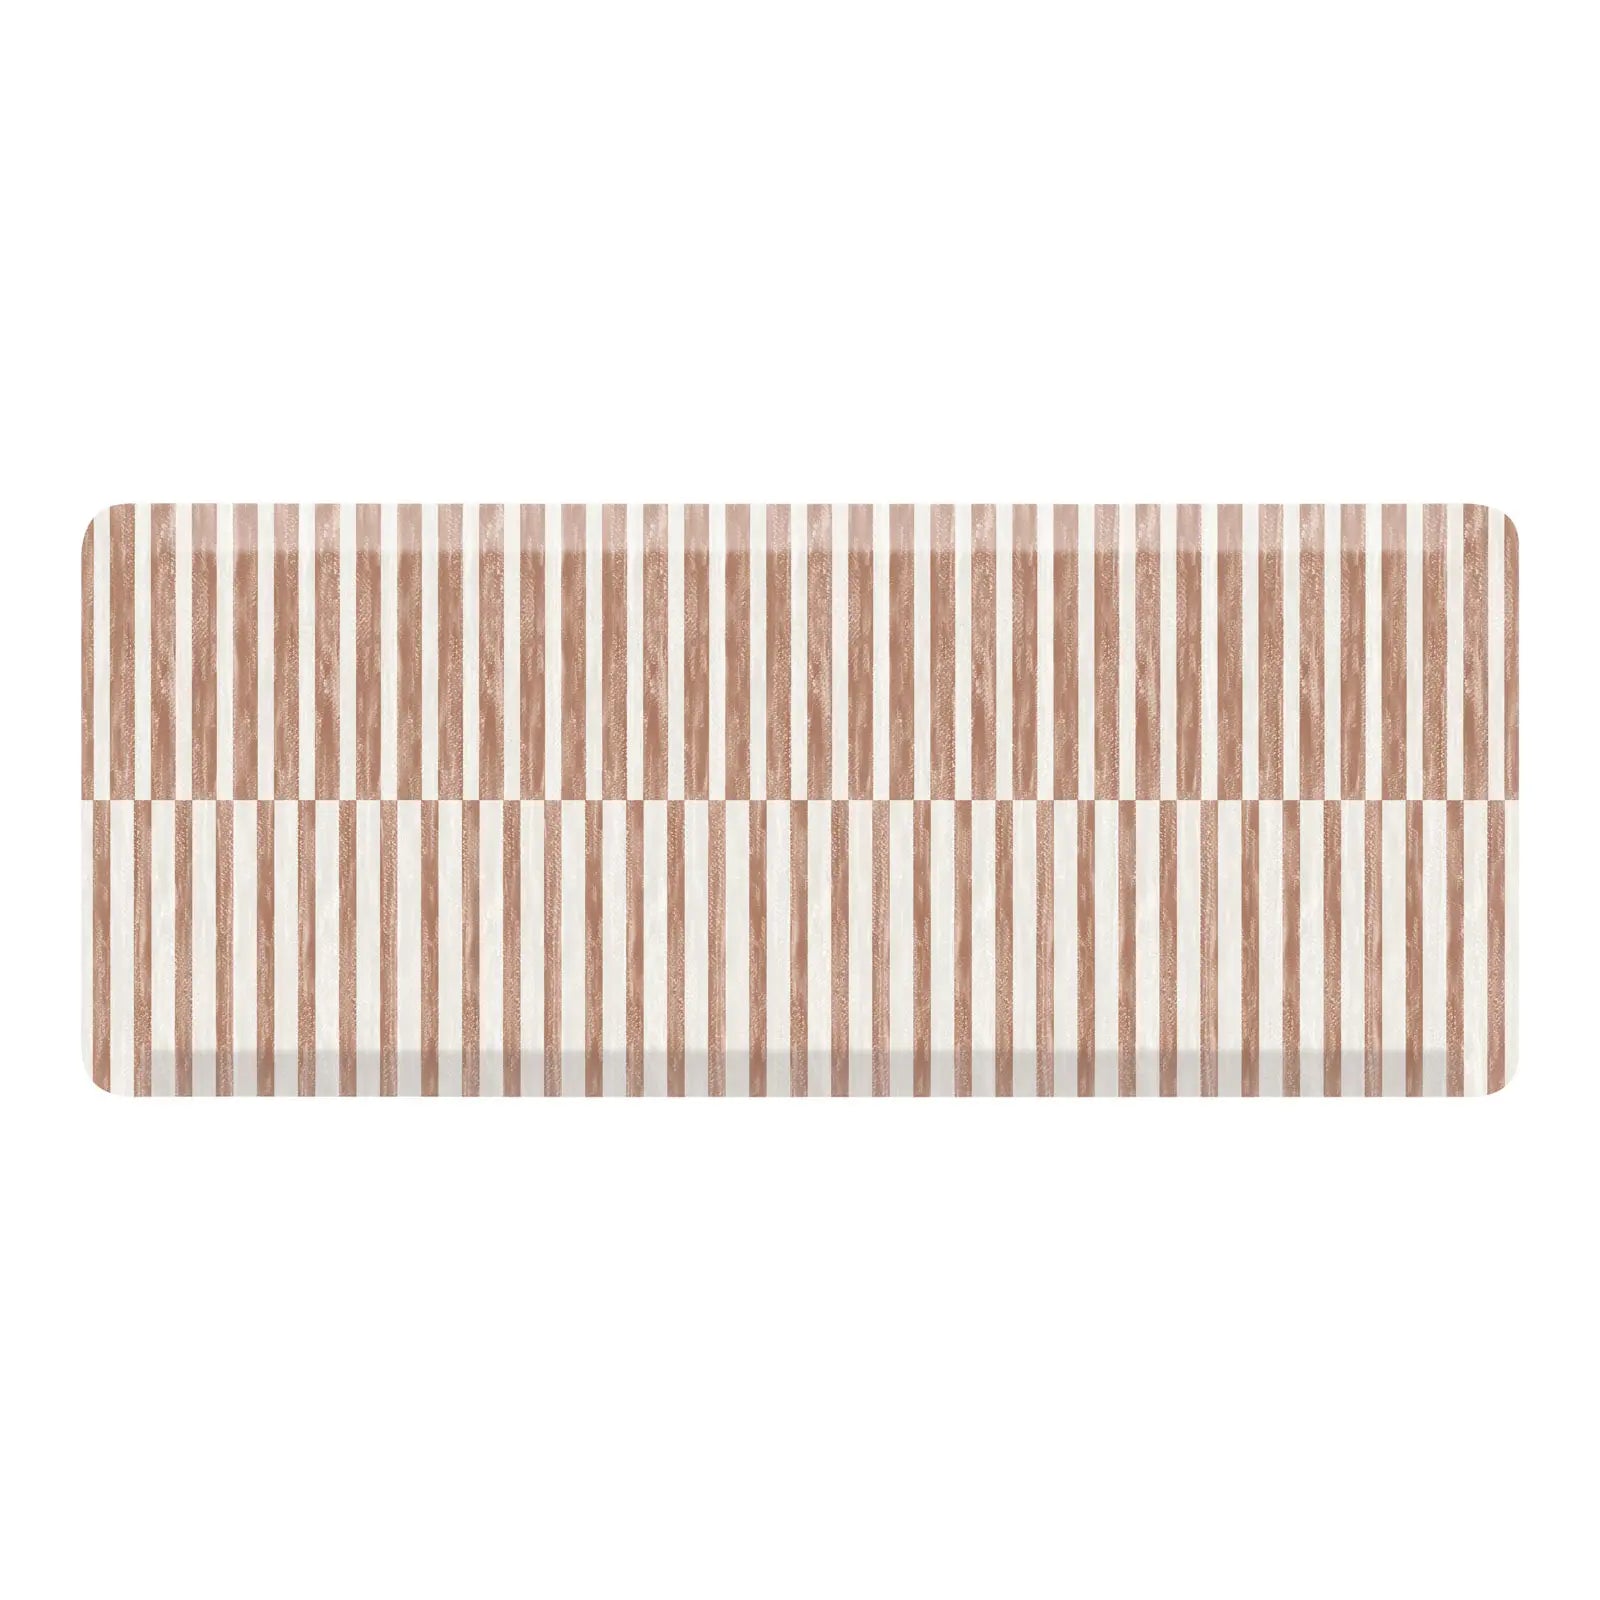 Reese terracotta brown and white inverted stripe standing mat shown in size 22x54